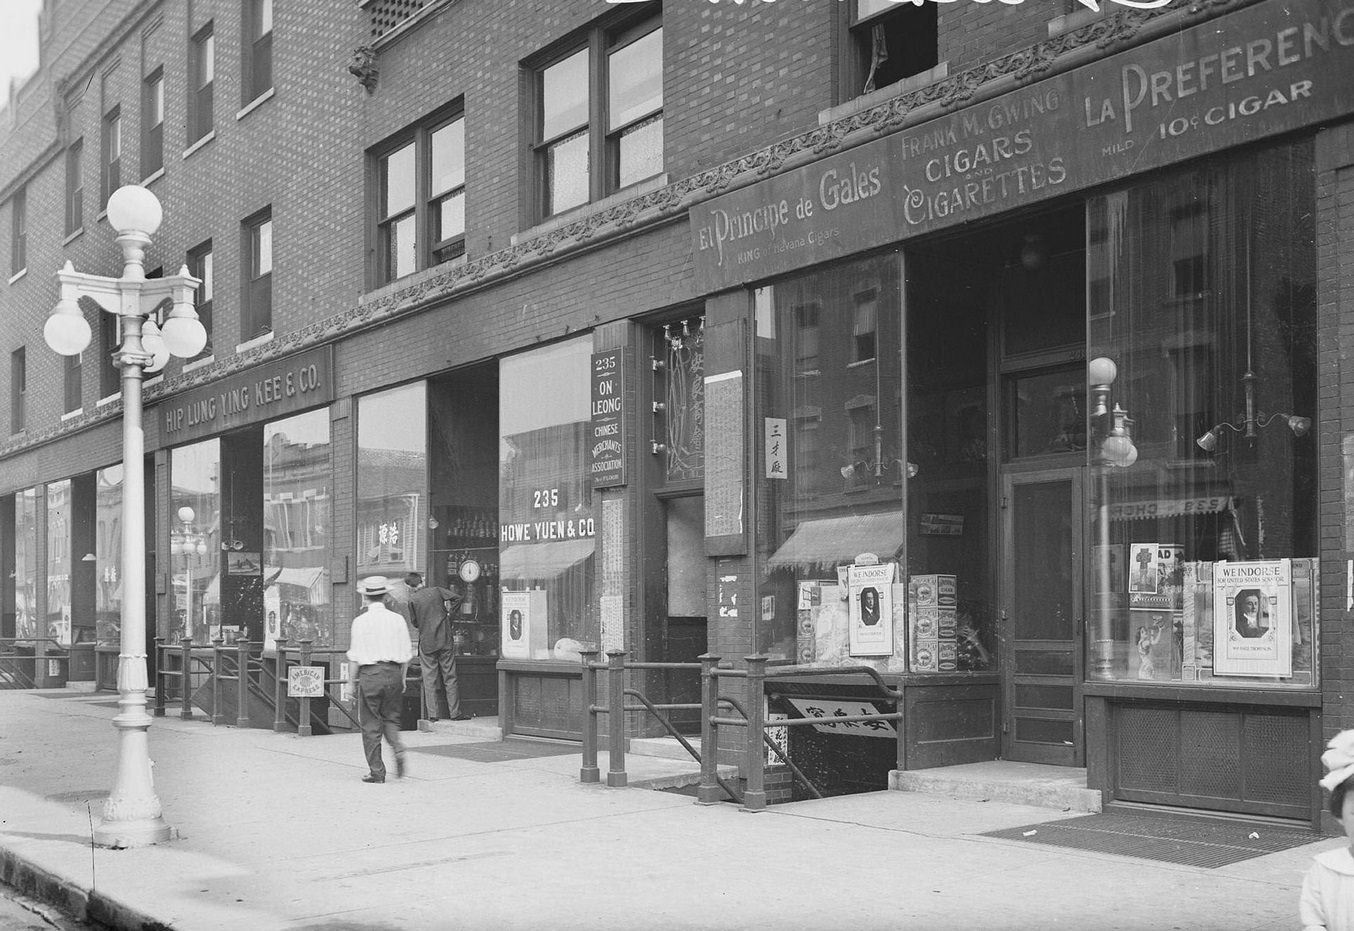 View of storefront in Chinatown, Hip Lung Yung Kee & Company, at 233 West 22nd Street in the Armour Square community area of Chicago, Illinois, 1910s.